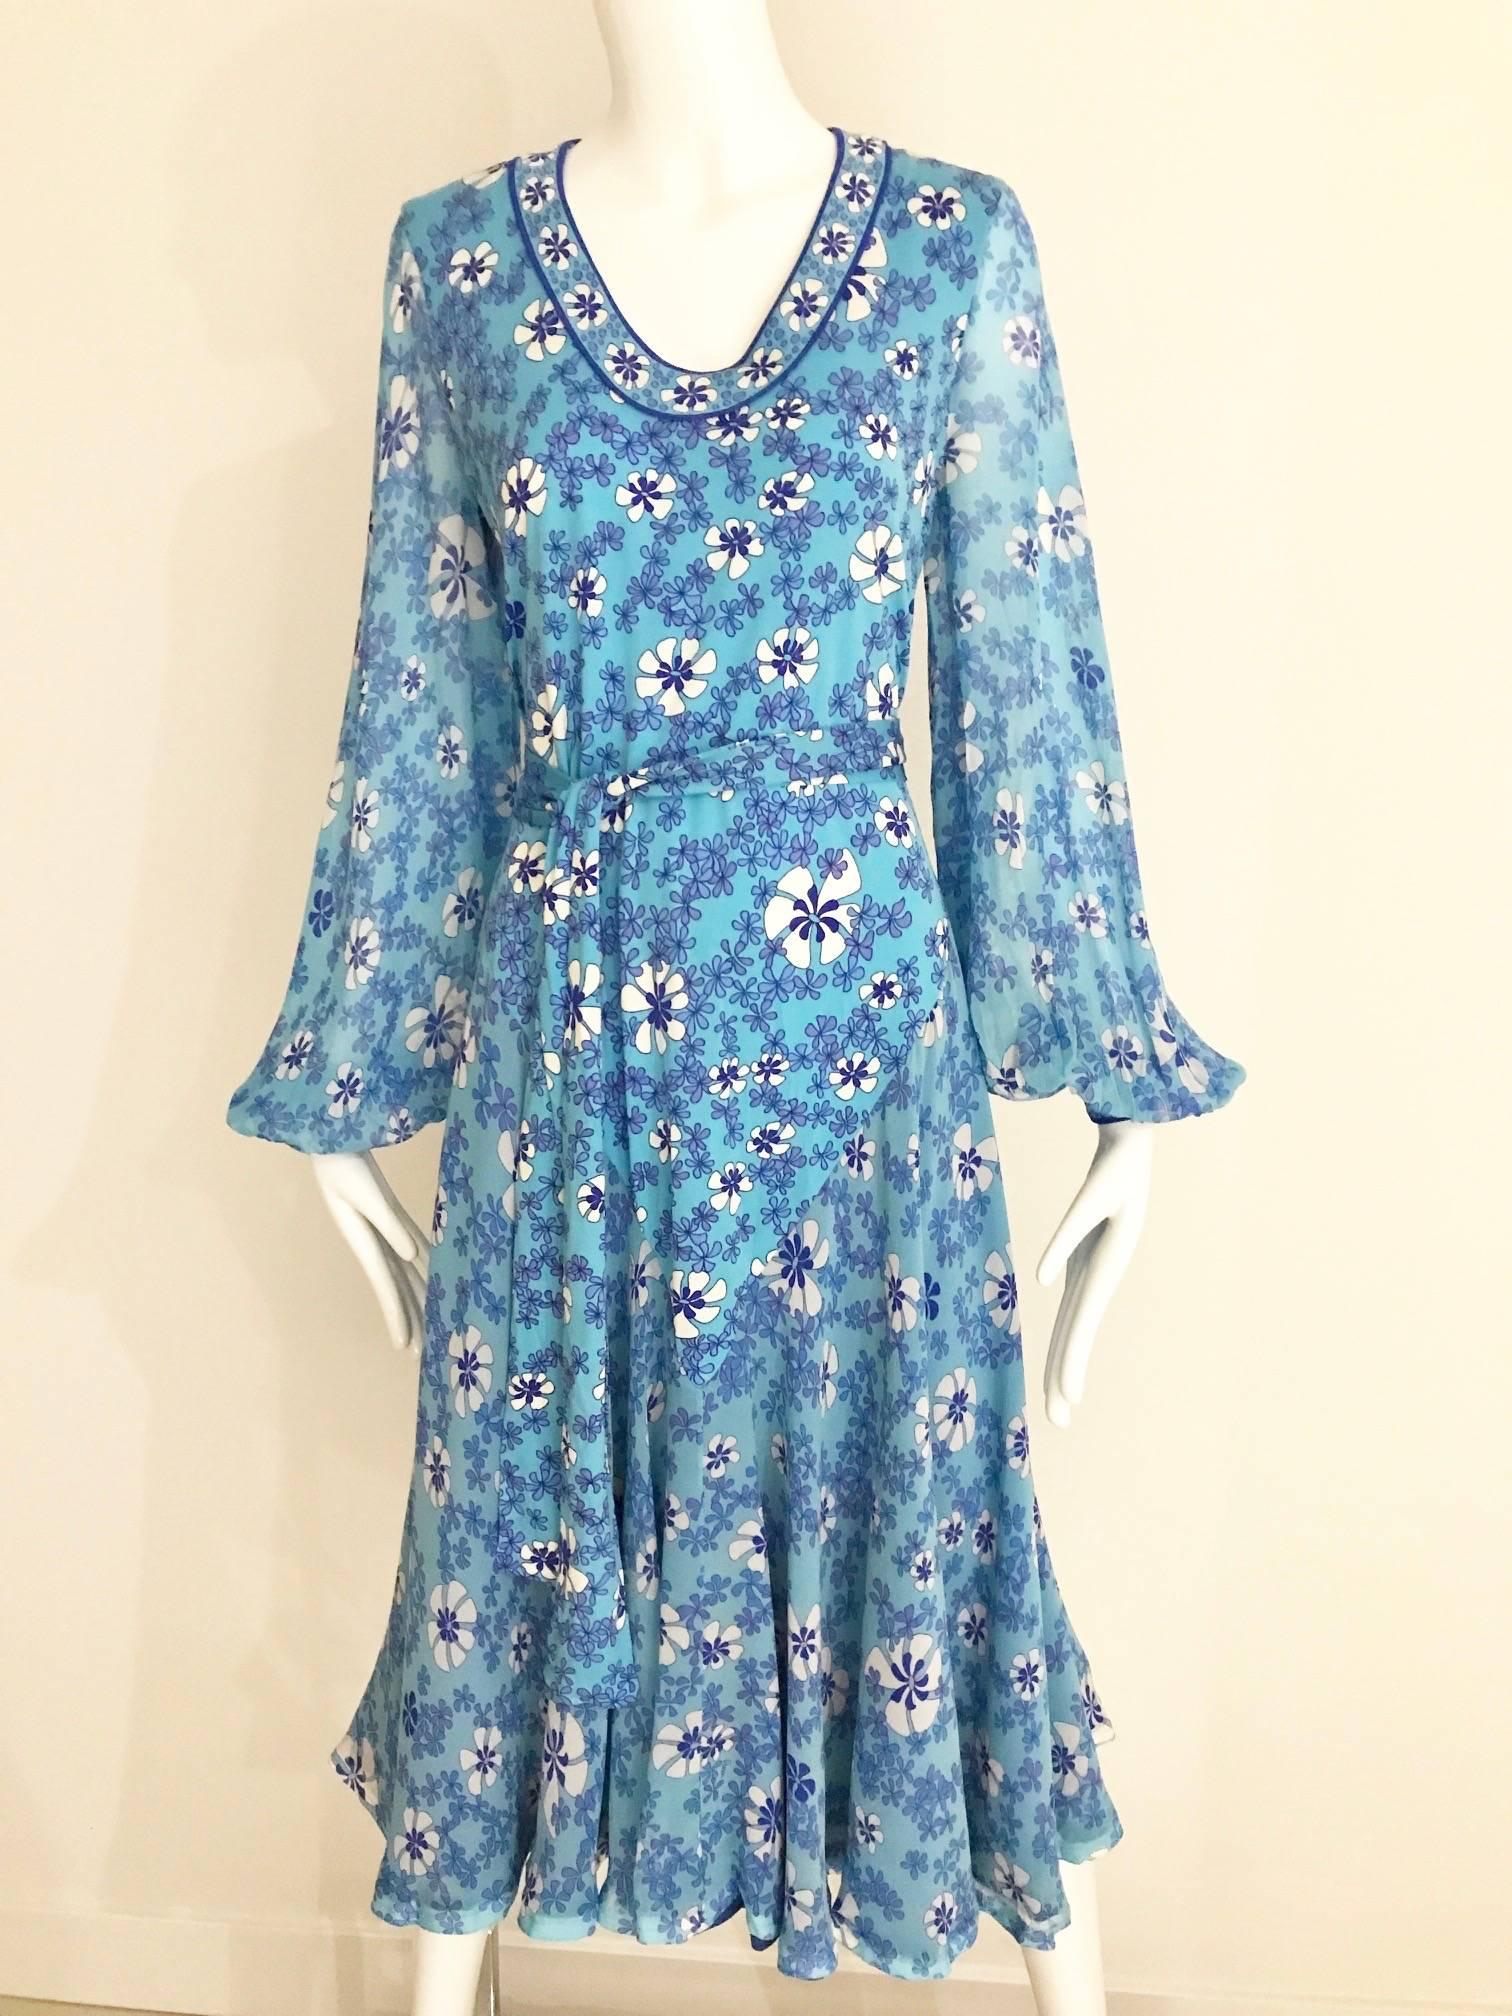 Vintage Averado Bessi blue and white mod floral print silk jersey summer dress with billowy sleeves. Dress comes with sash. sleeves is made of silk chiffon. Dress is lined in silk.
Bust: 38